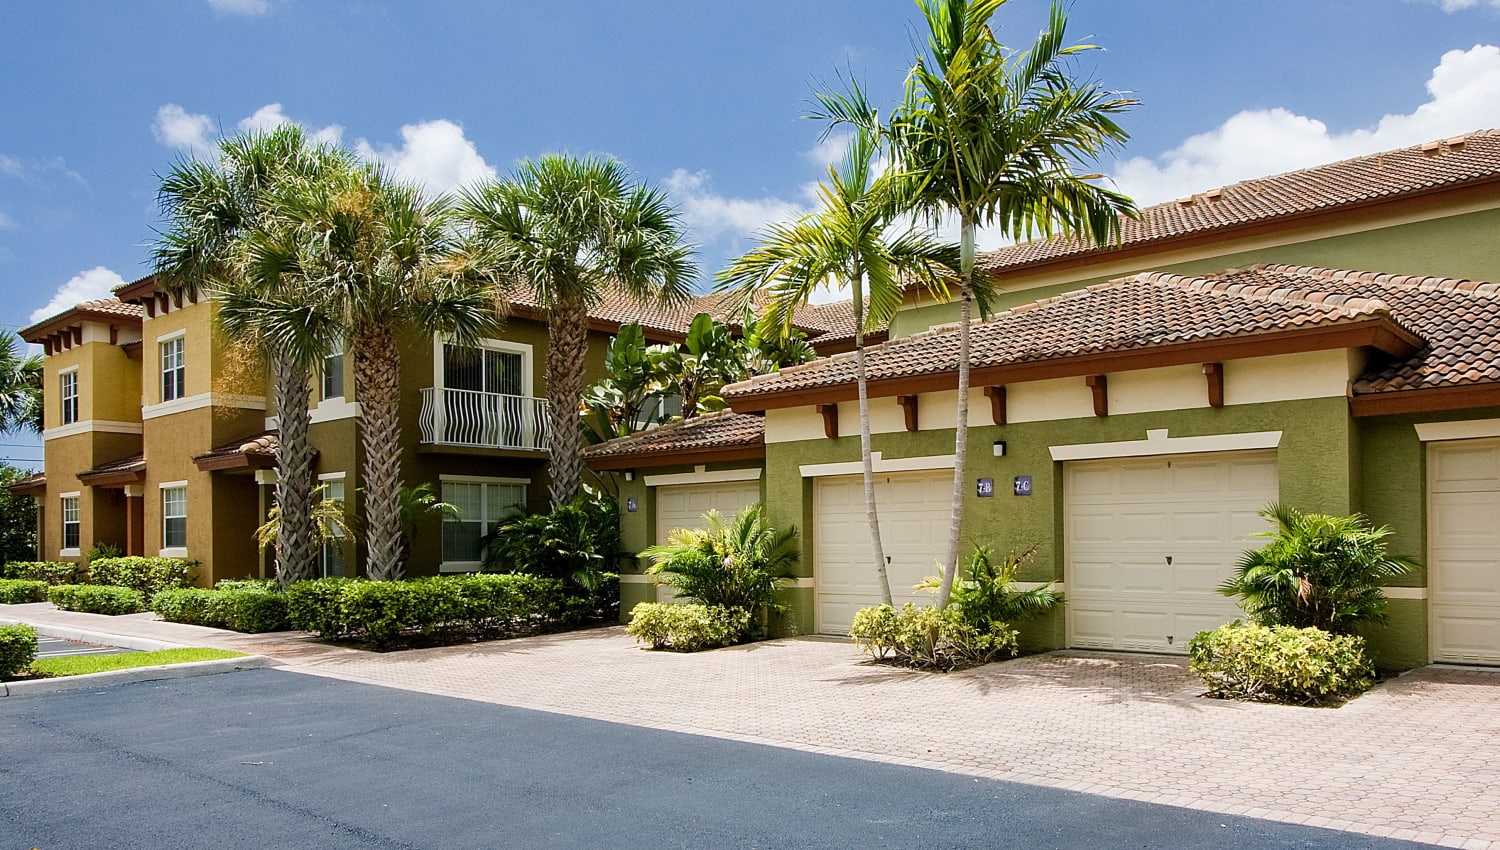 Buildings and garages at Delray Bay Apartments in Delray Beach, Florida